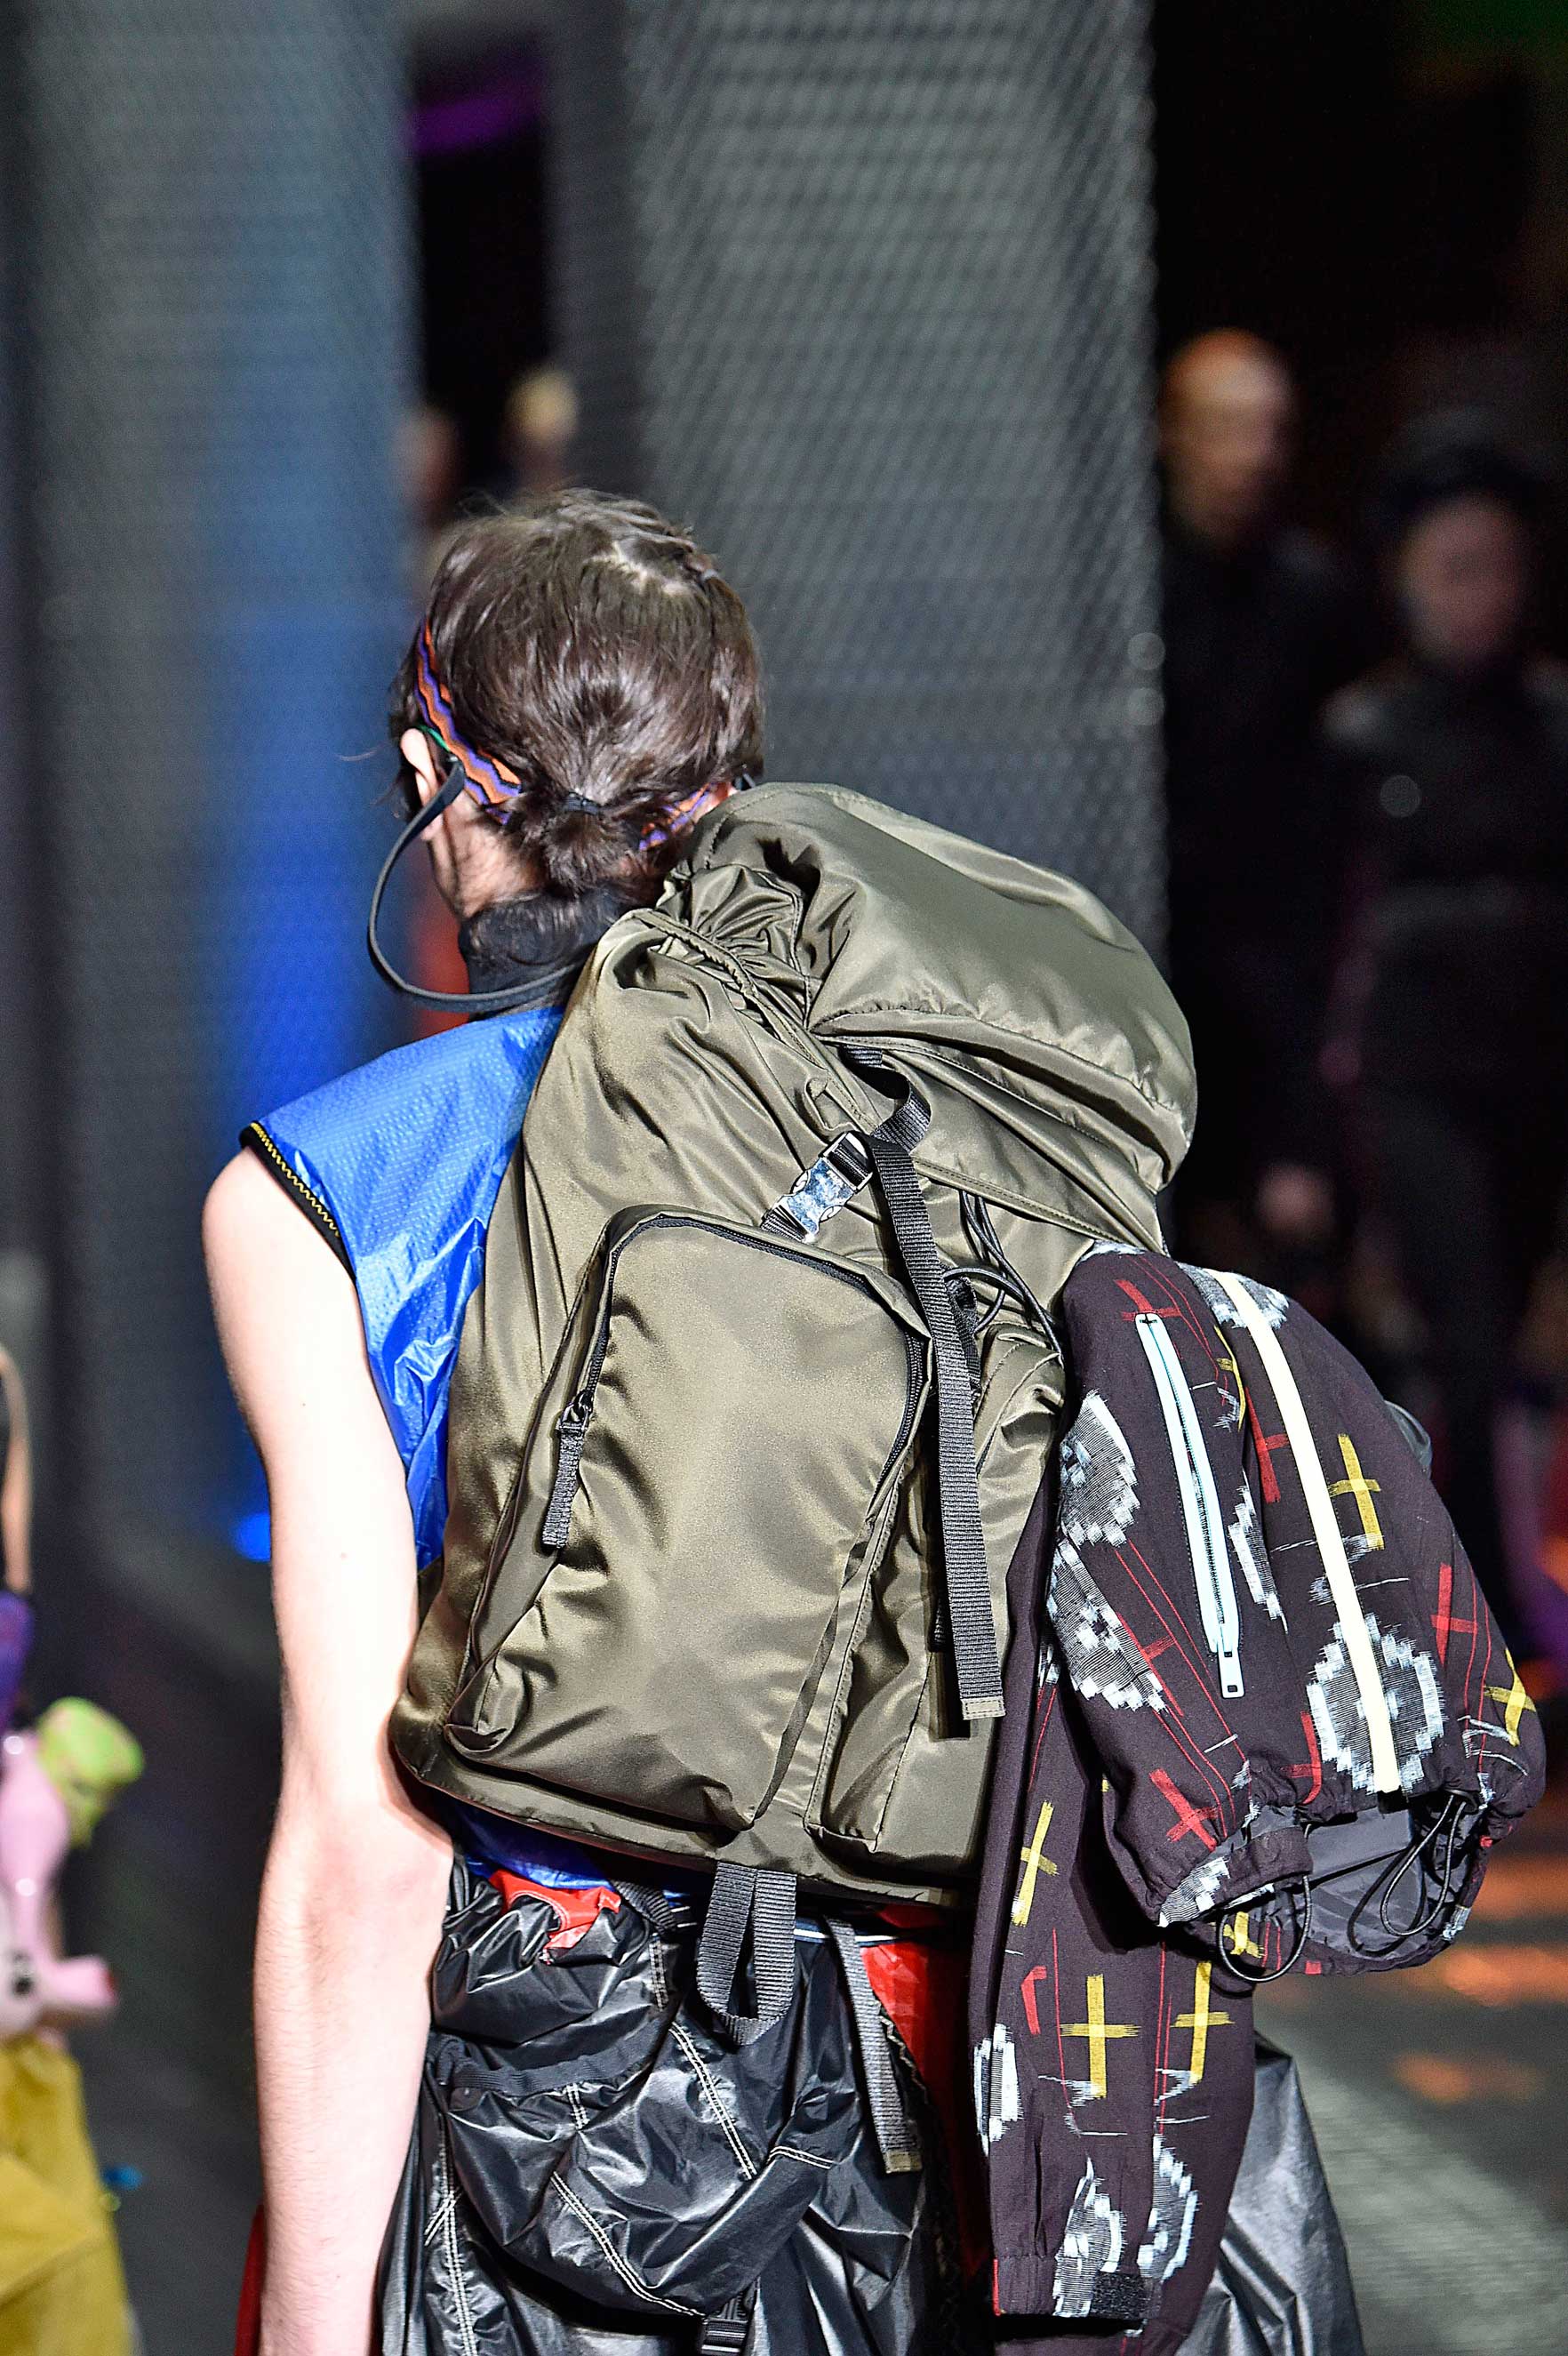 Revived in new textiles and colors, this Prada backpack was first designed in 1984. It was featured on the design house’s spring-summer 2017 catwalk, a bold utilitarian throwback. (Victor Virgile—Gamma-Rapho/Getty Images)